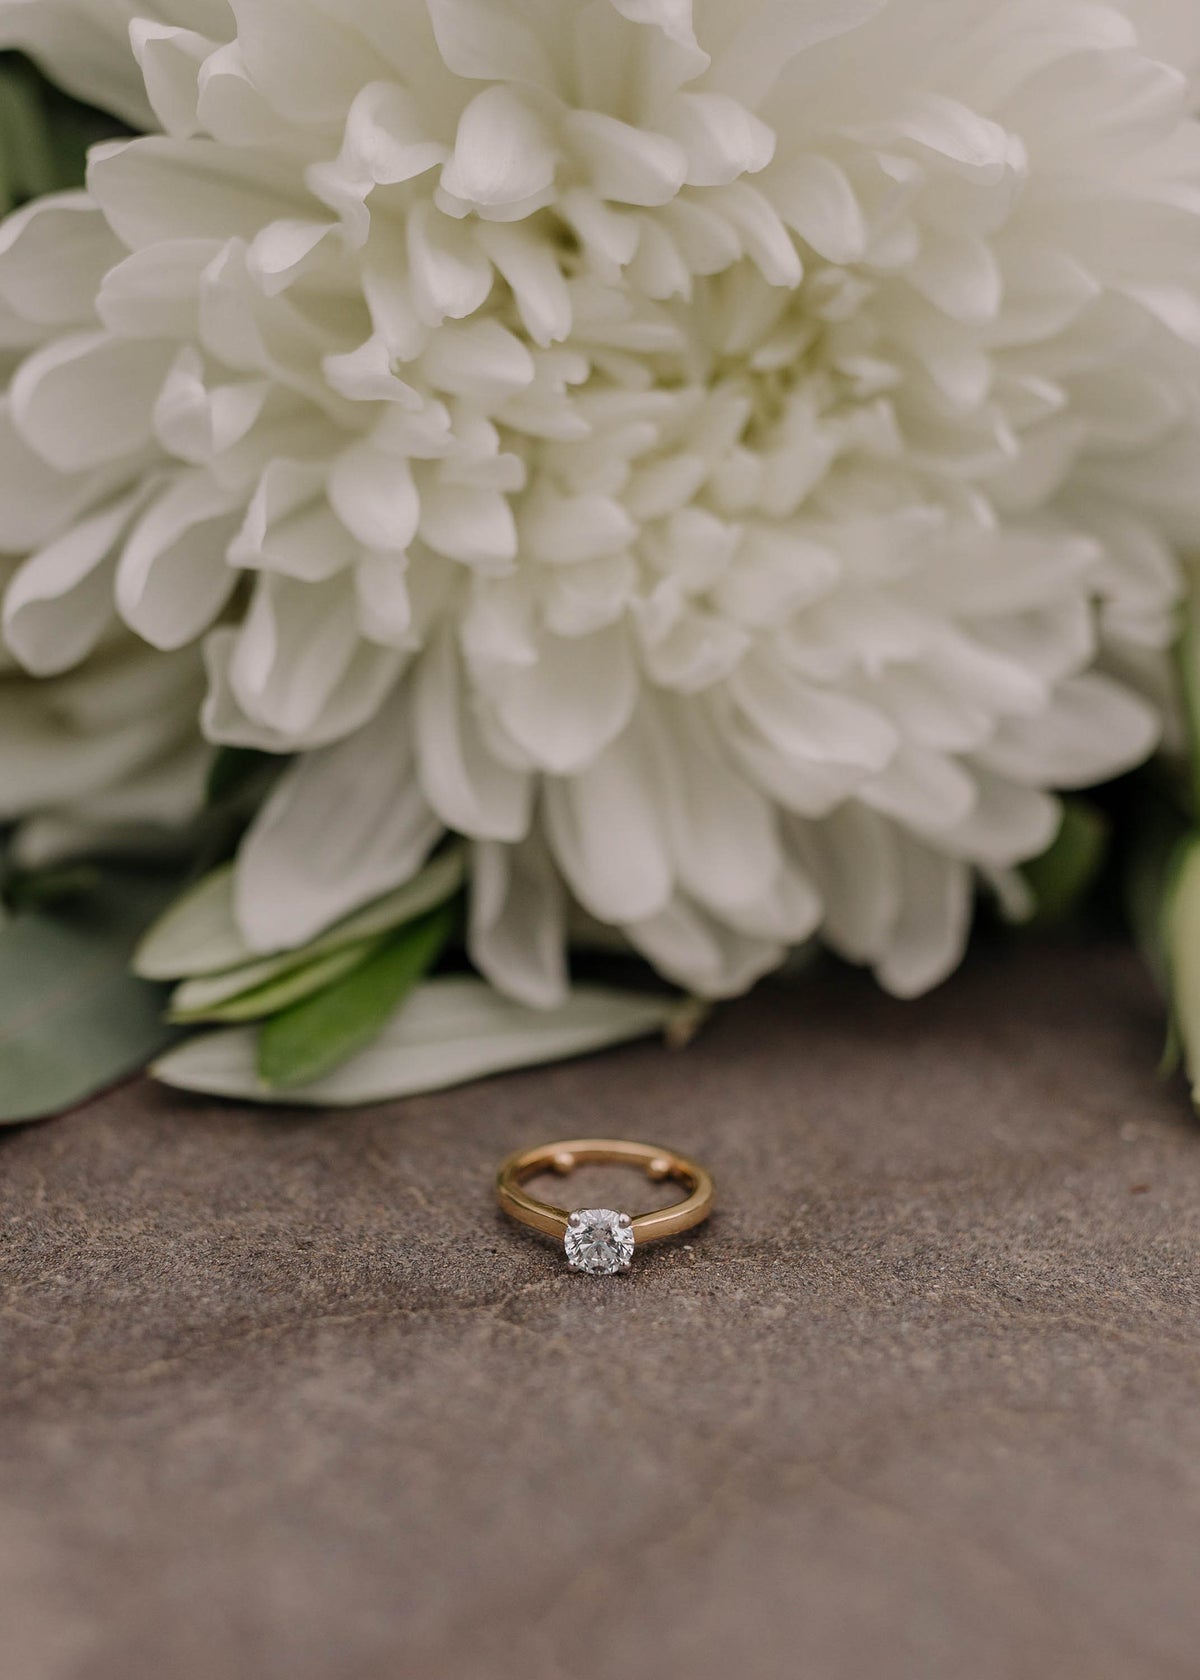 DIAMOND-ENGAGEMENT-RING-WITH-WHITE-FLOWER-IN-BACKGROUND